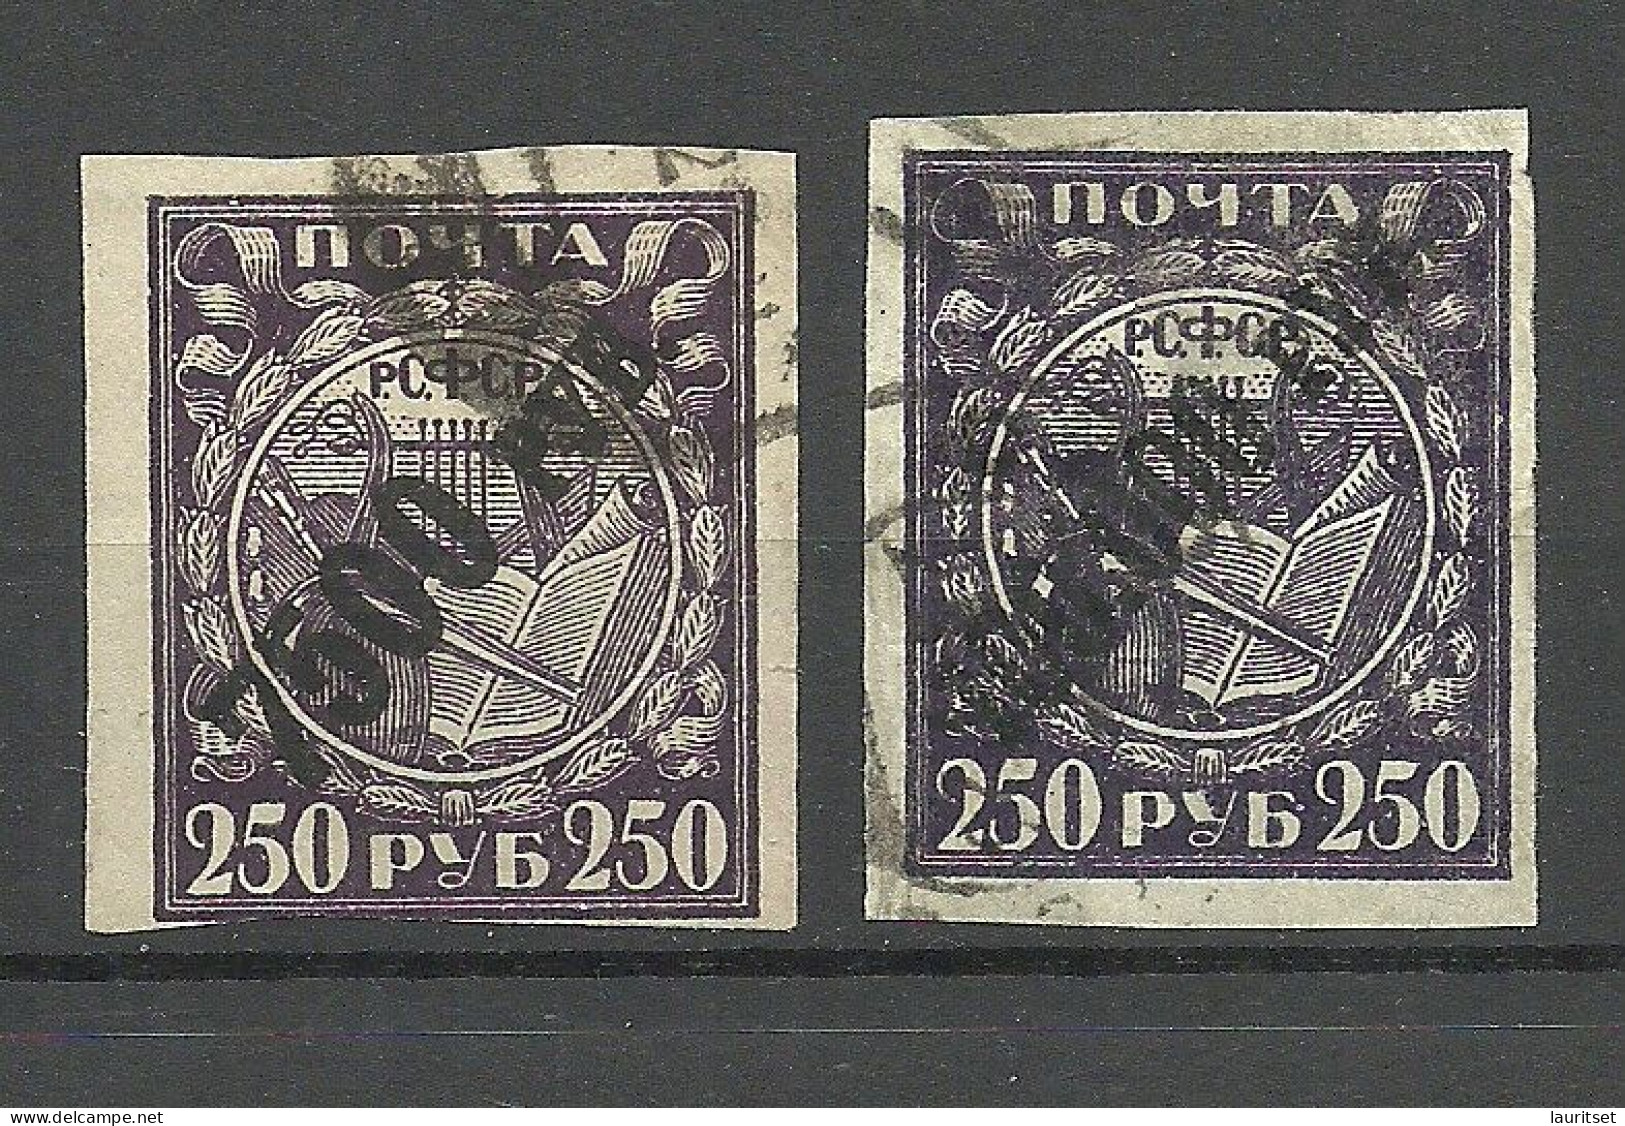 RUSSIA Russland 1922 Michel 180 & 190 O - Used Stamps